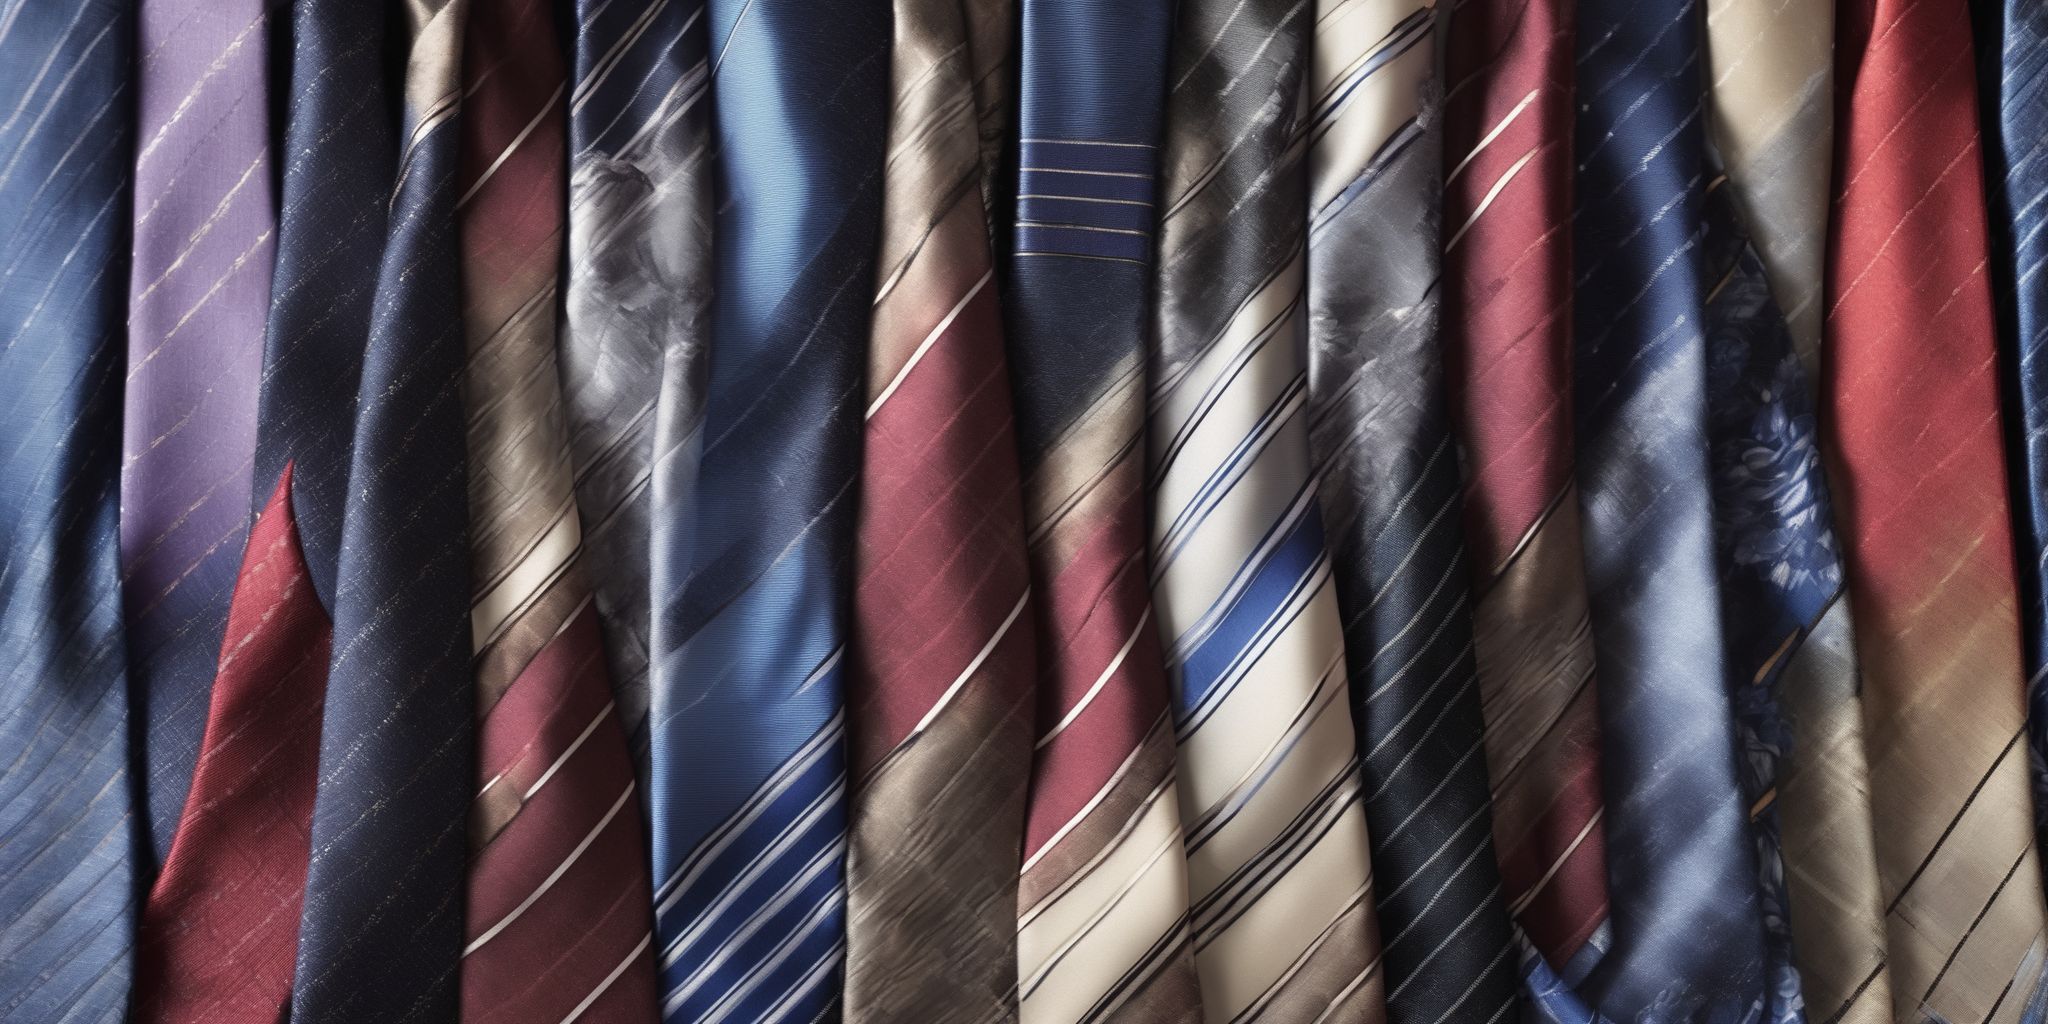 Ties  in realistic, photographic style